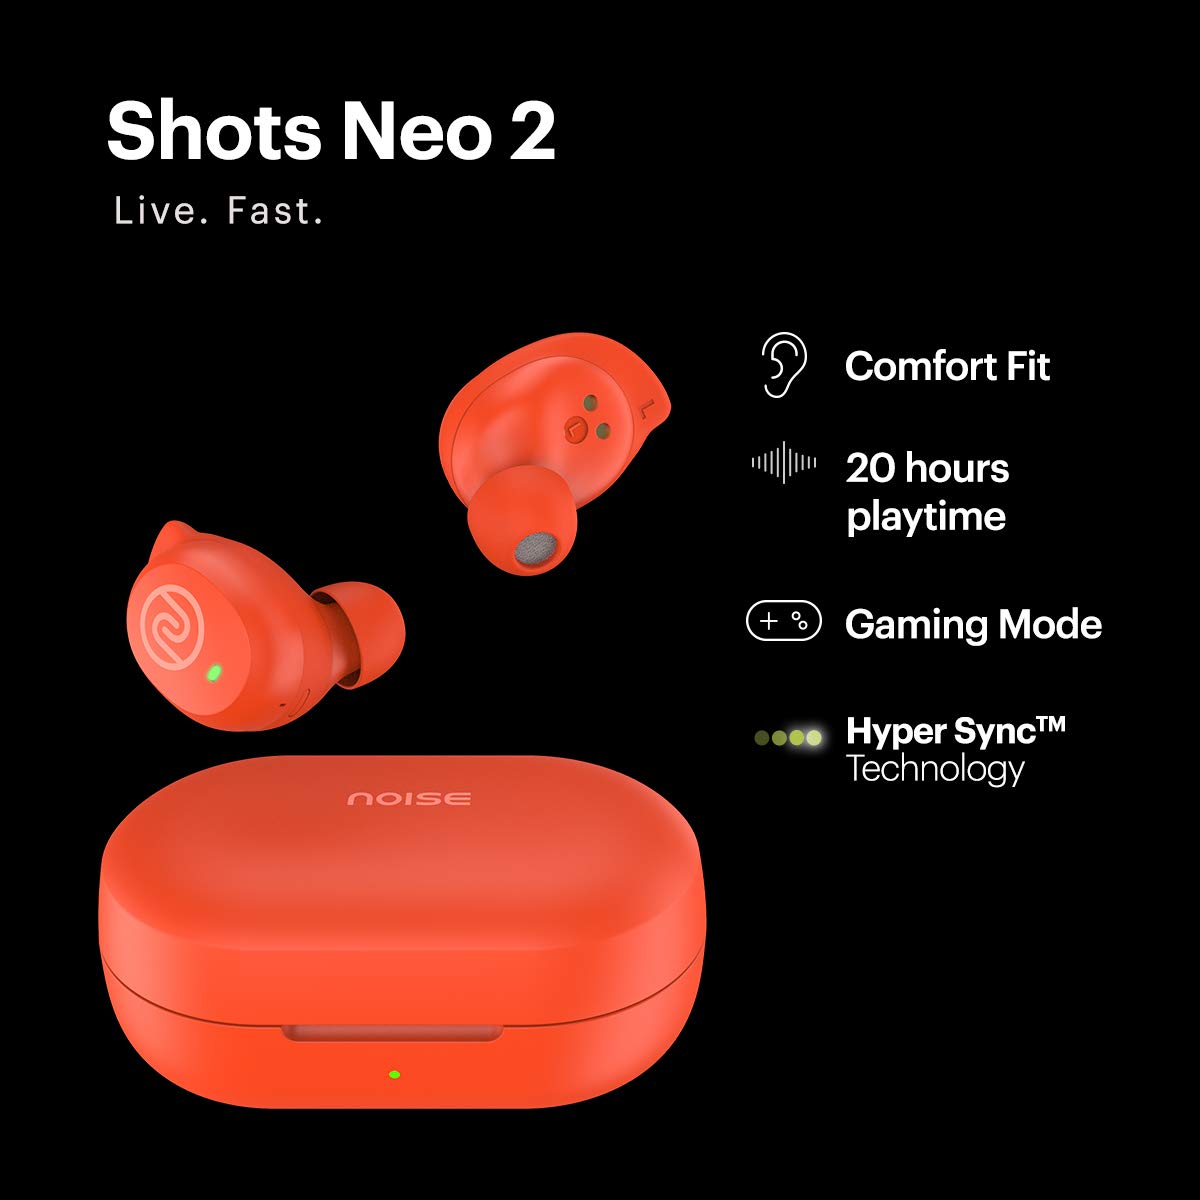 noise shots neo 2 wireless earbuds with gaming mode,20 hour playtime,powerful bass